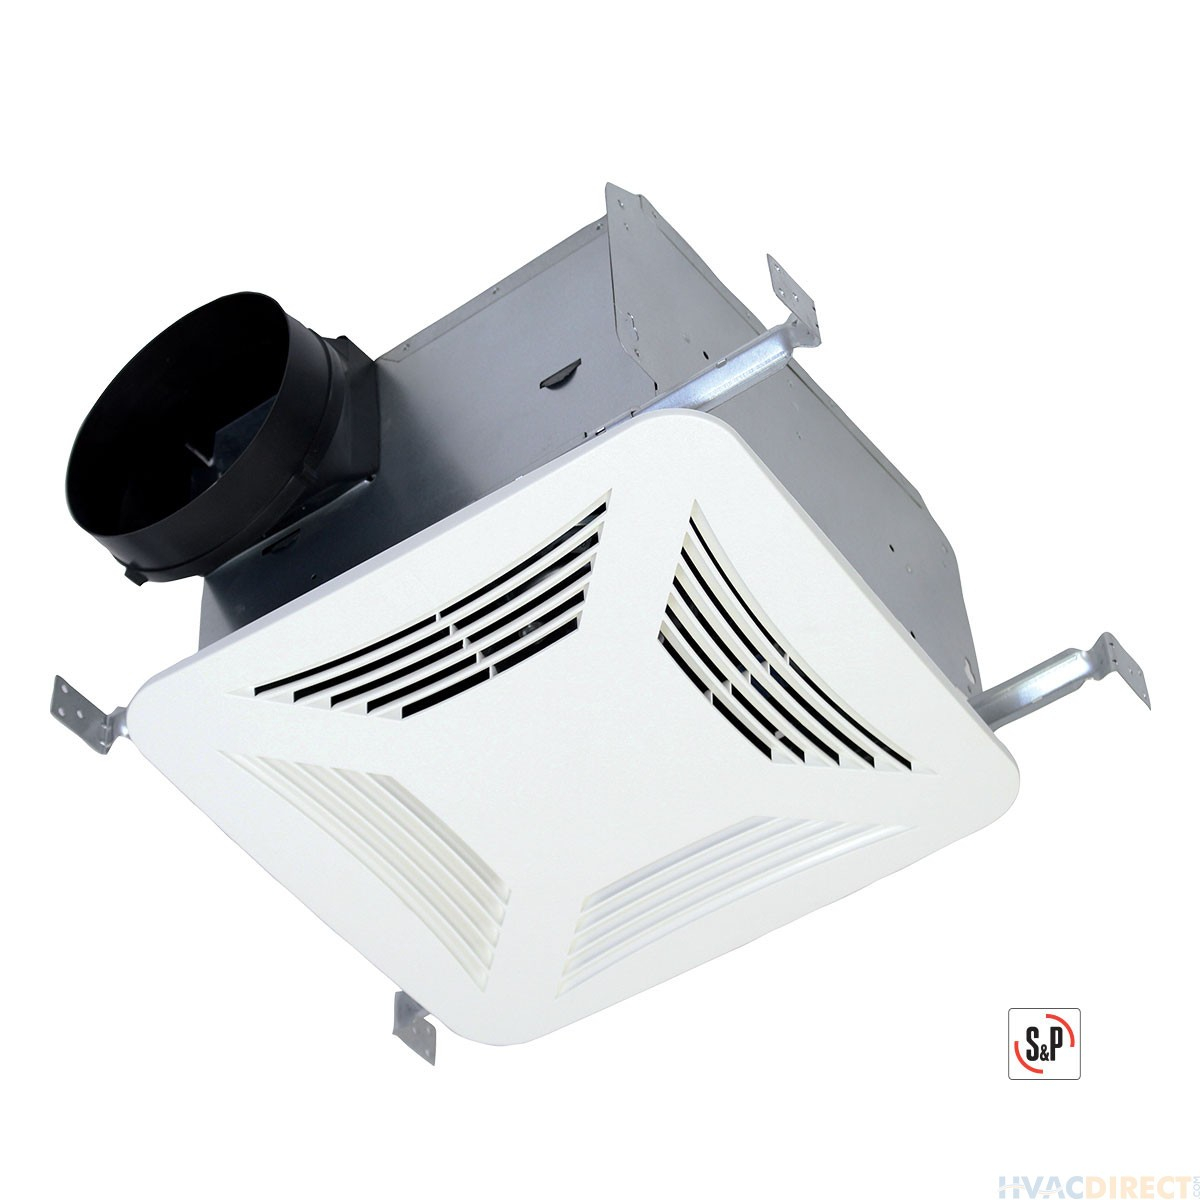 Sp Premium Choice Ceiling Mounted Bathroom Exhaust Fan 80 Cfm Pc80x with size 1200 X 1200